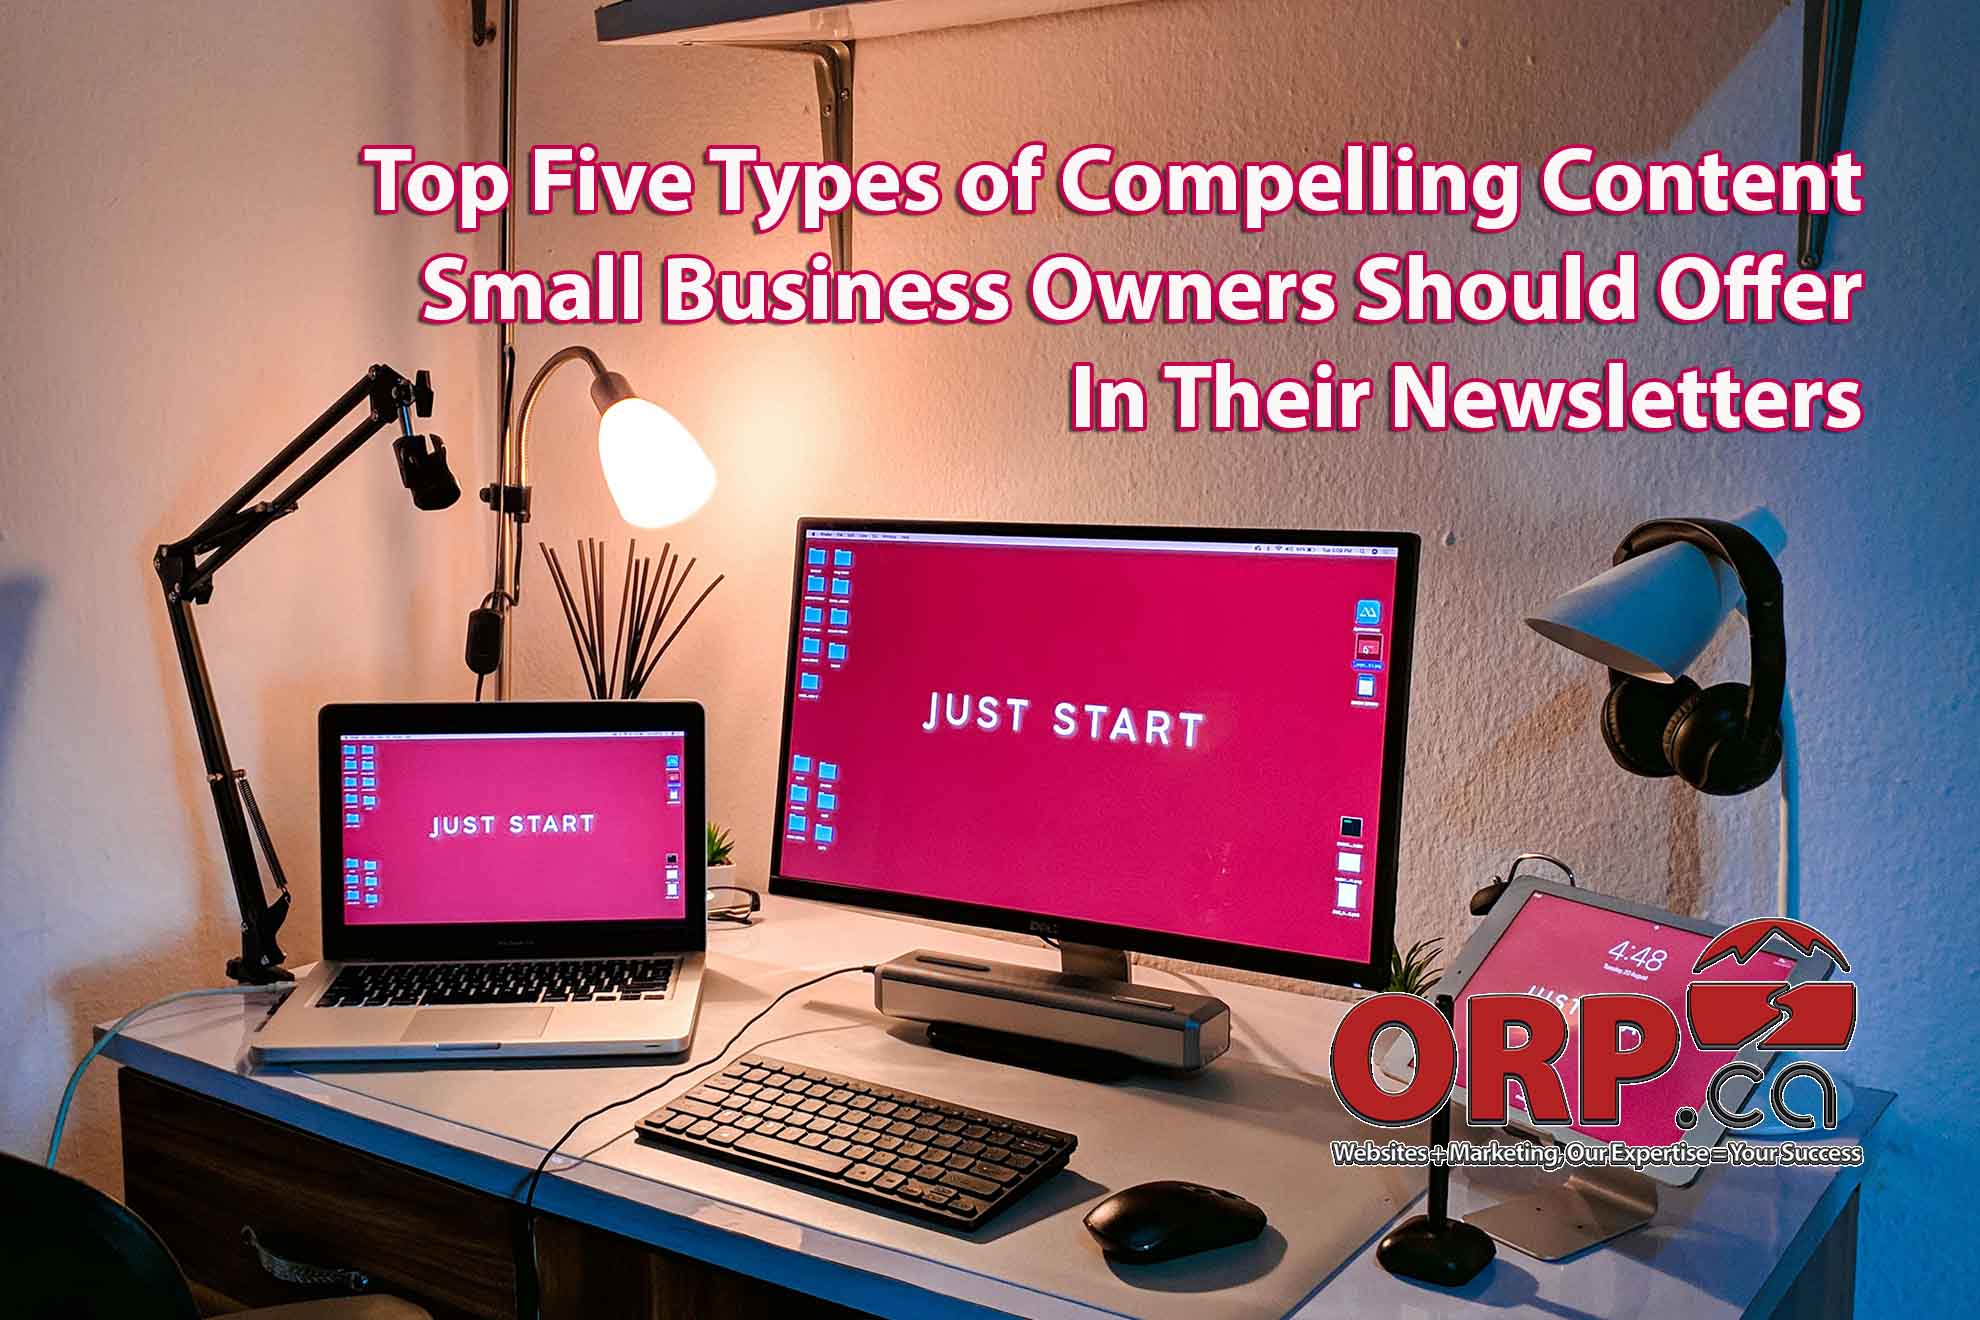 Top Five Types of Compelling Content Small Business Owners Should Offer In Their Newsletters from ORP.ca Websites + Marketing - Our Expertise + your Success - Services for Small Business and Business Professionals